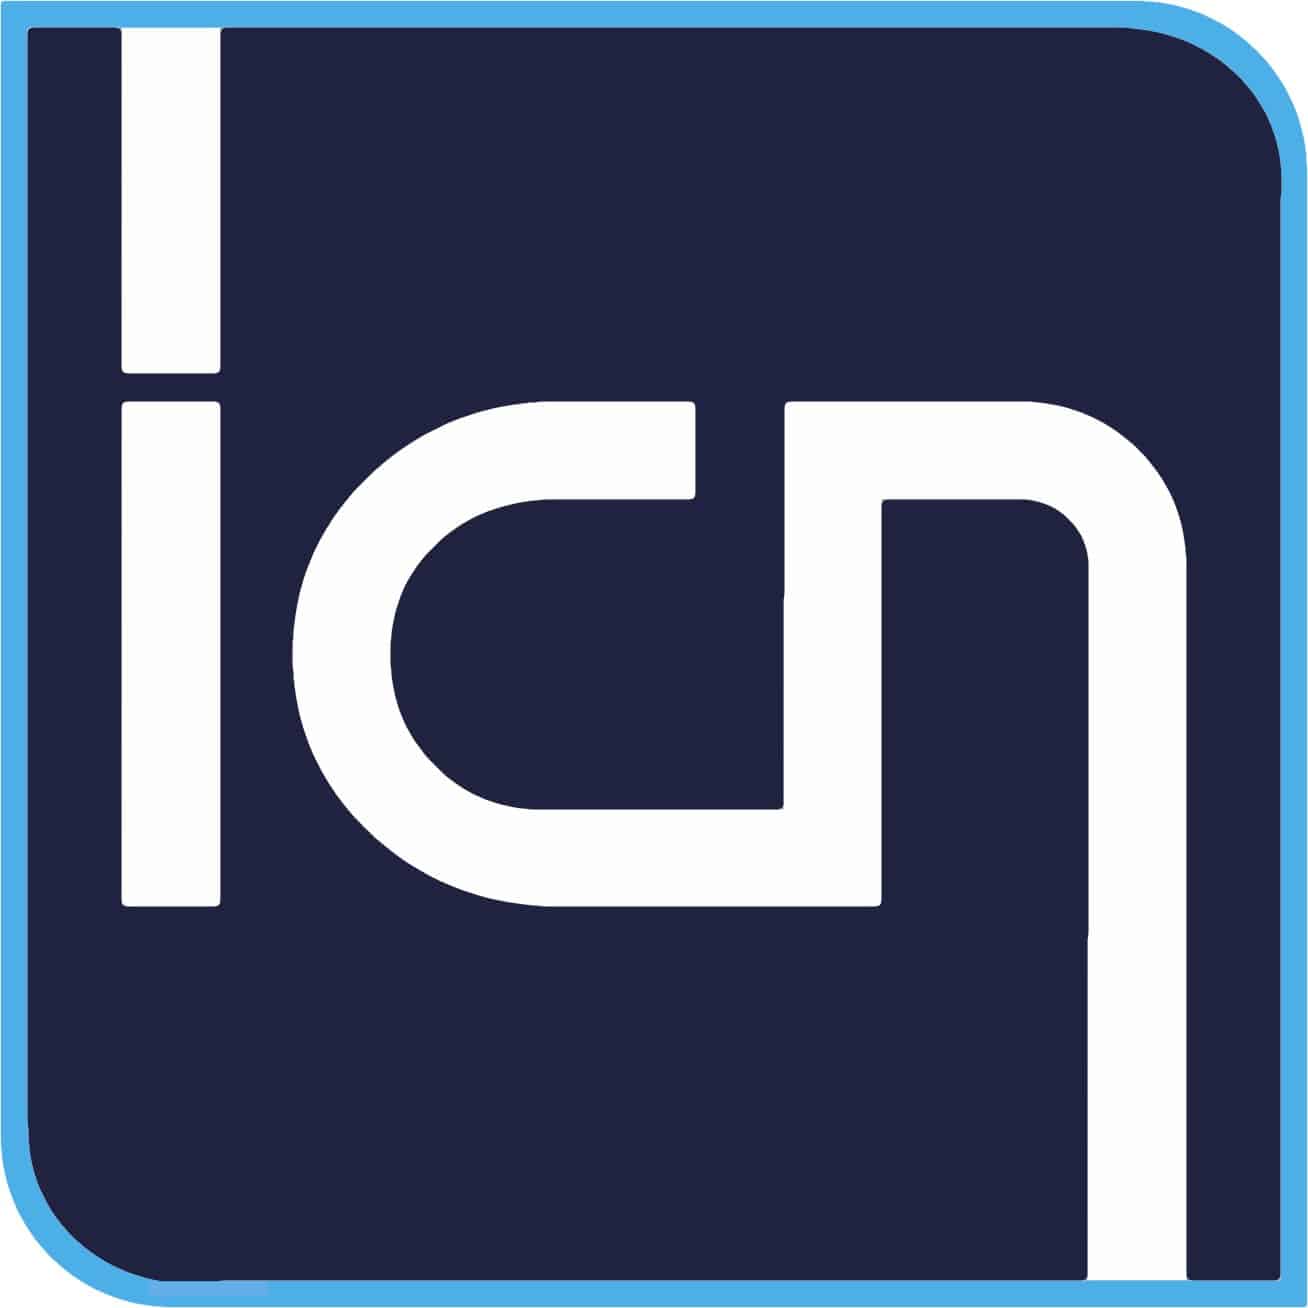 ICN Logo - Intensive Care Network Home - Intensive Care Network